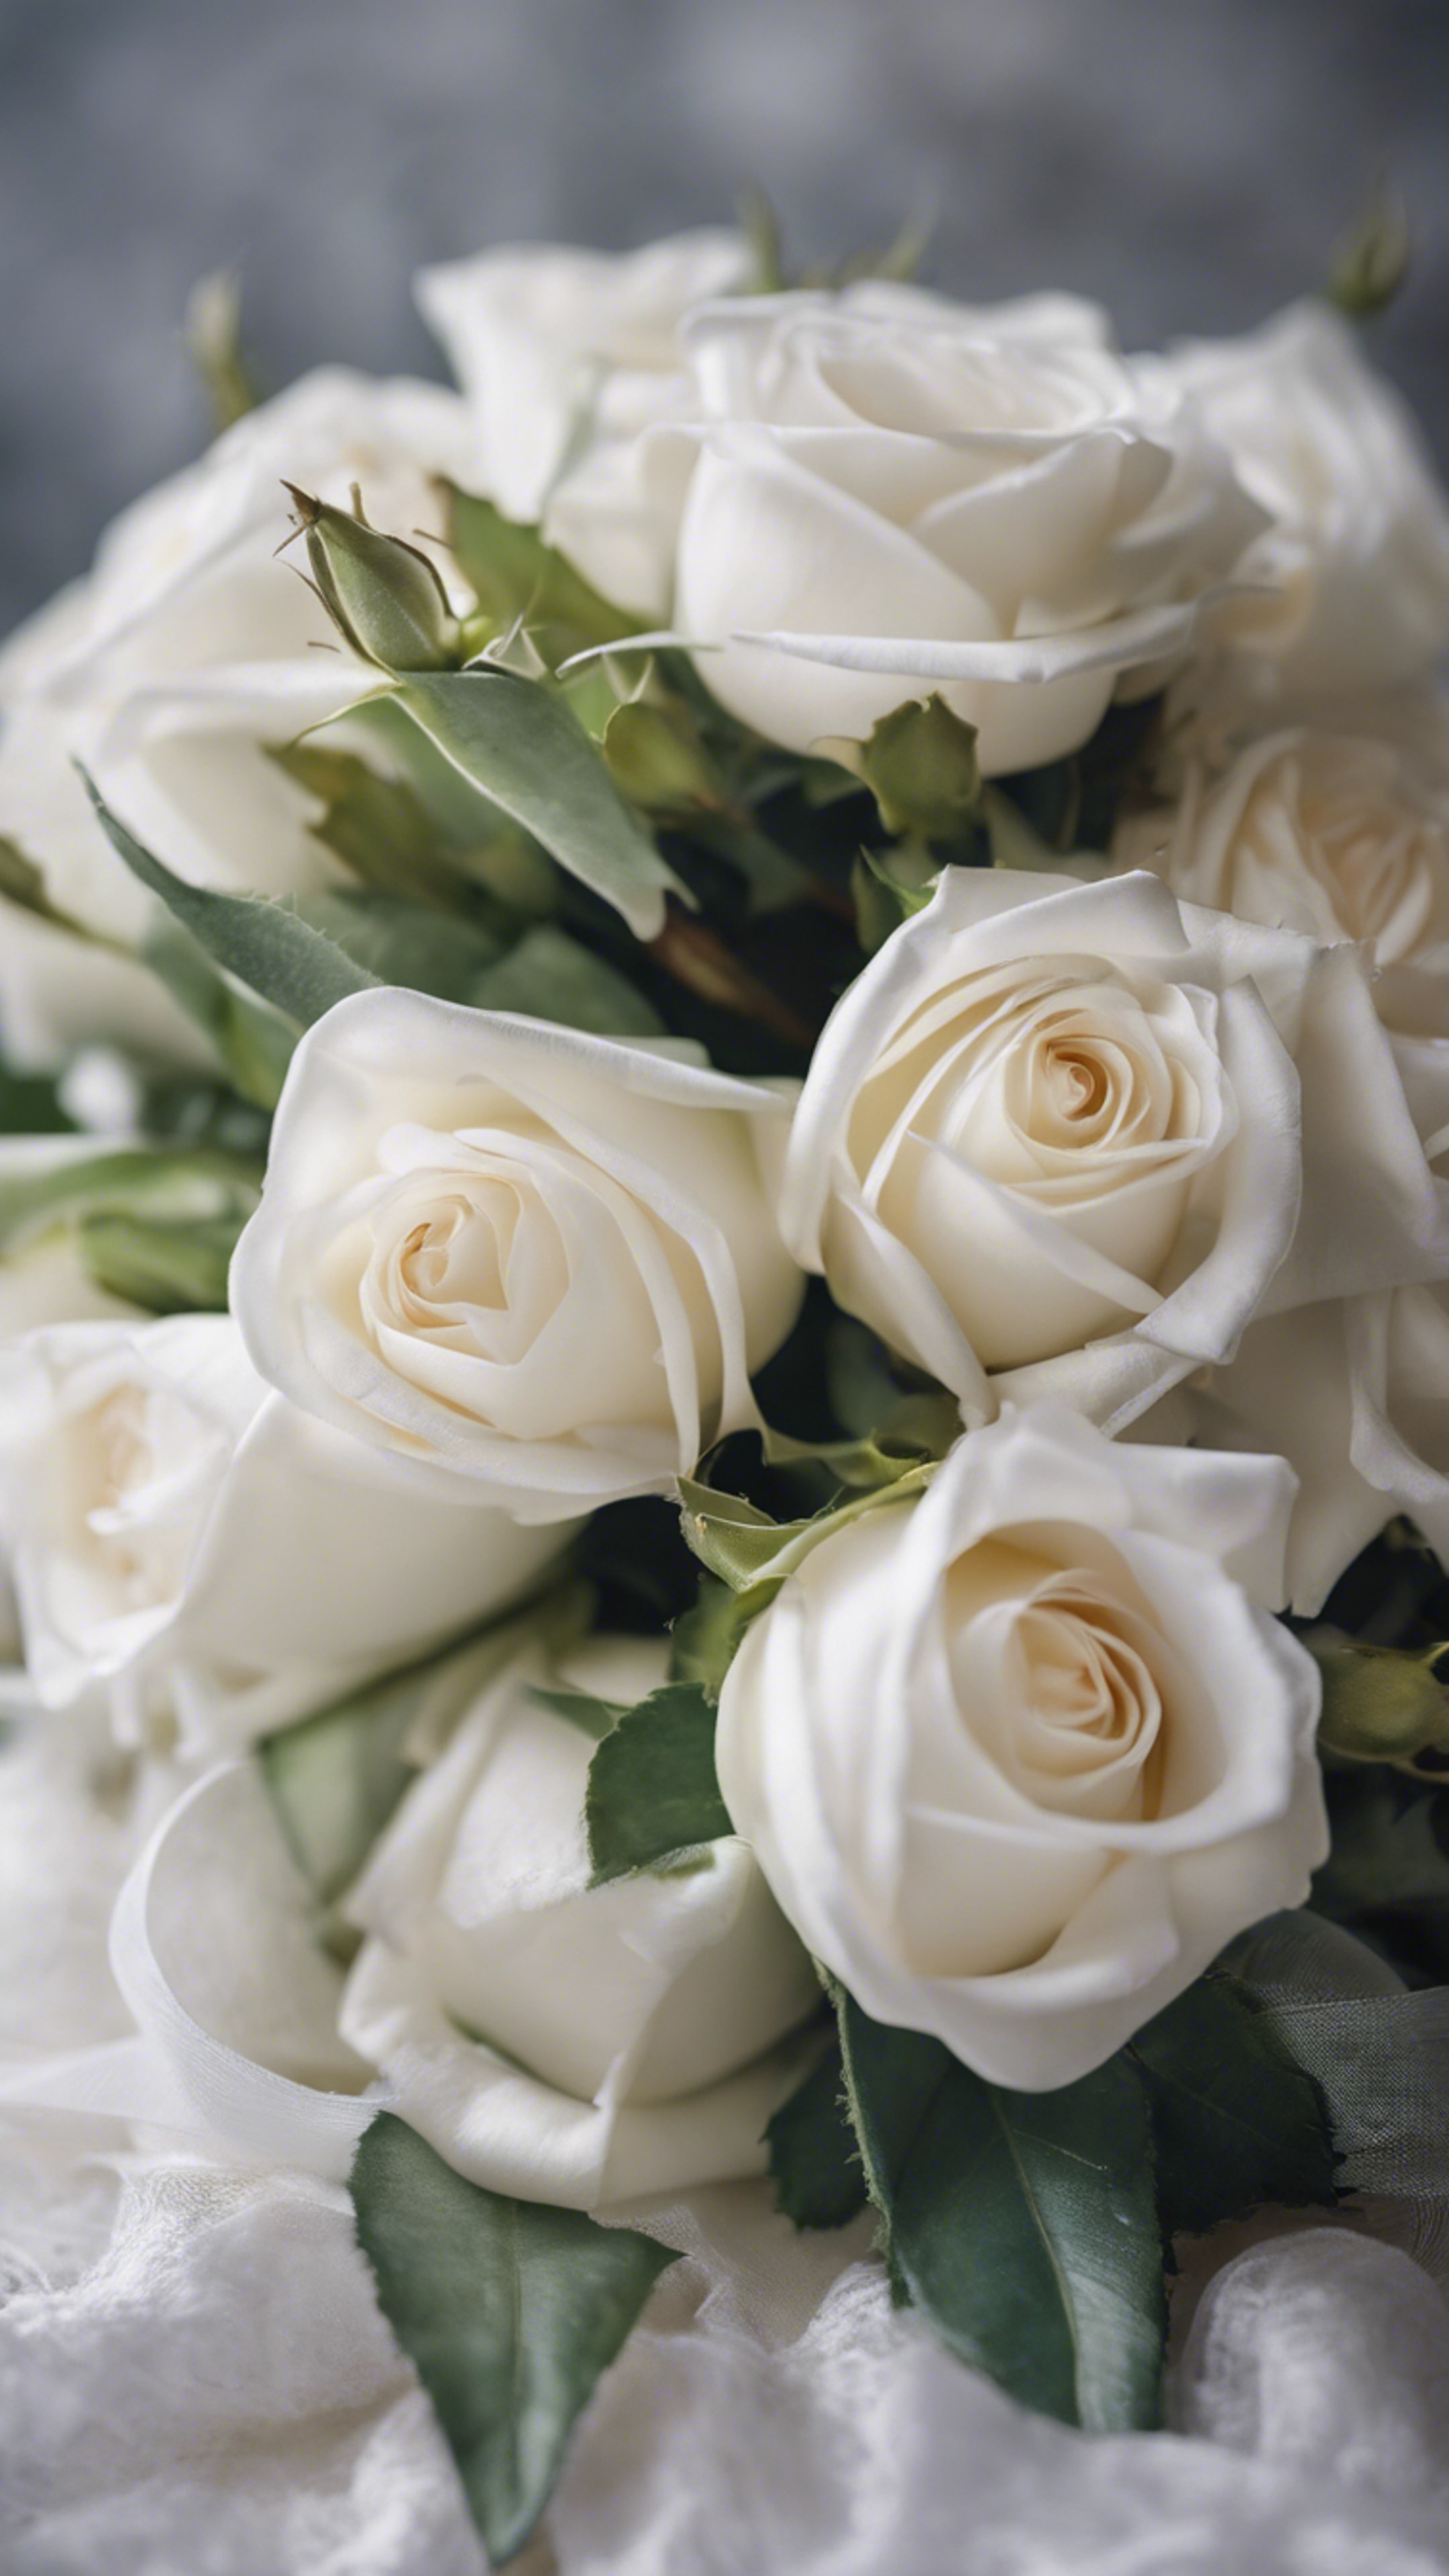 A bouquet of white roses wrapped in sheer white satin ribbon. Wallpaper[5223d8c249ea42cfaf4b]